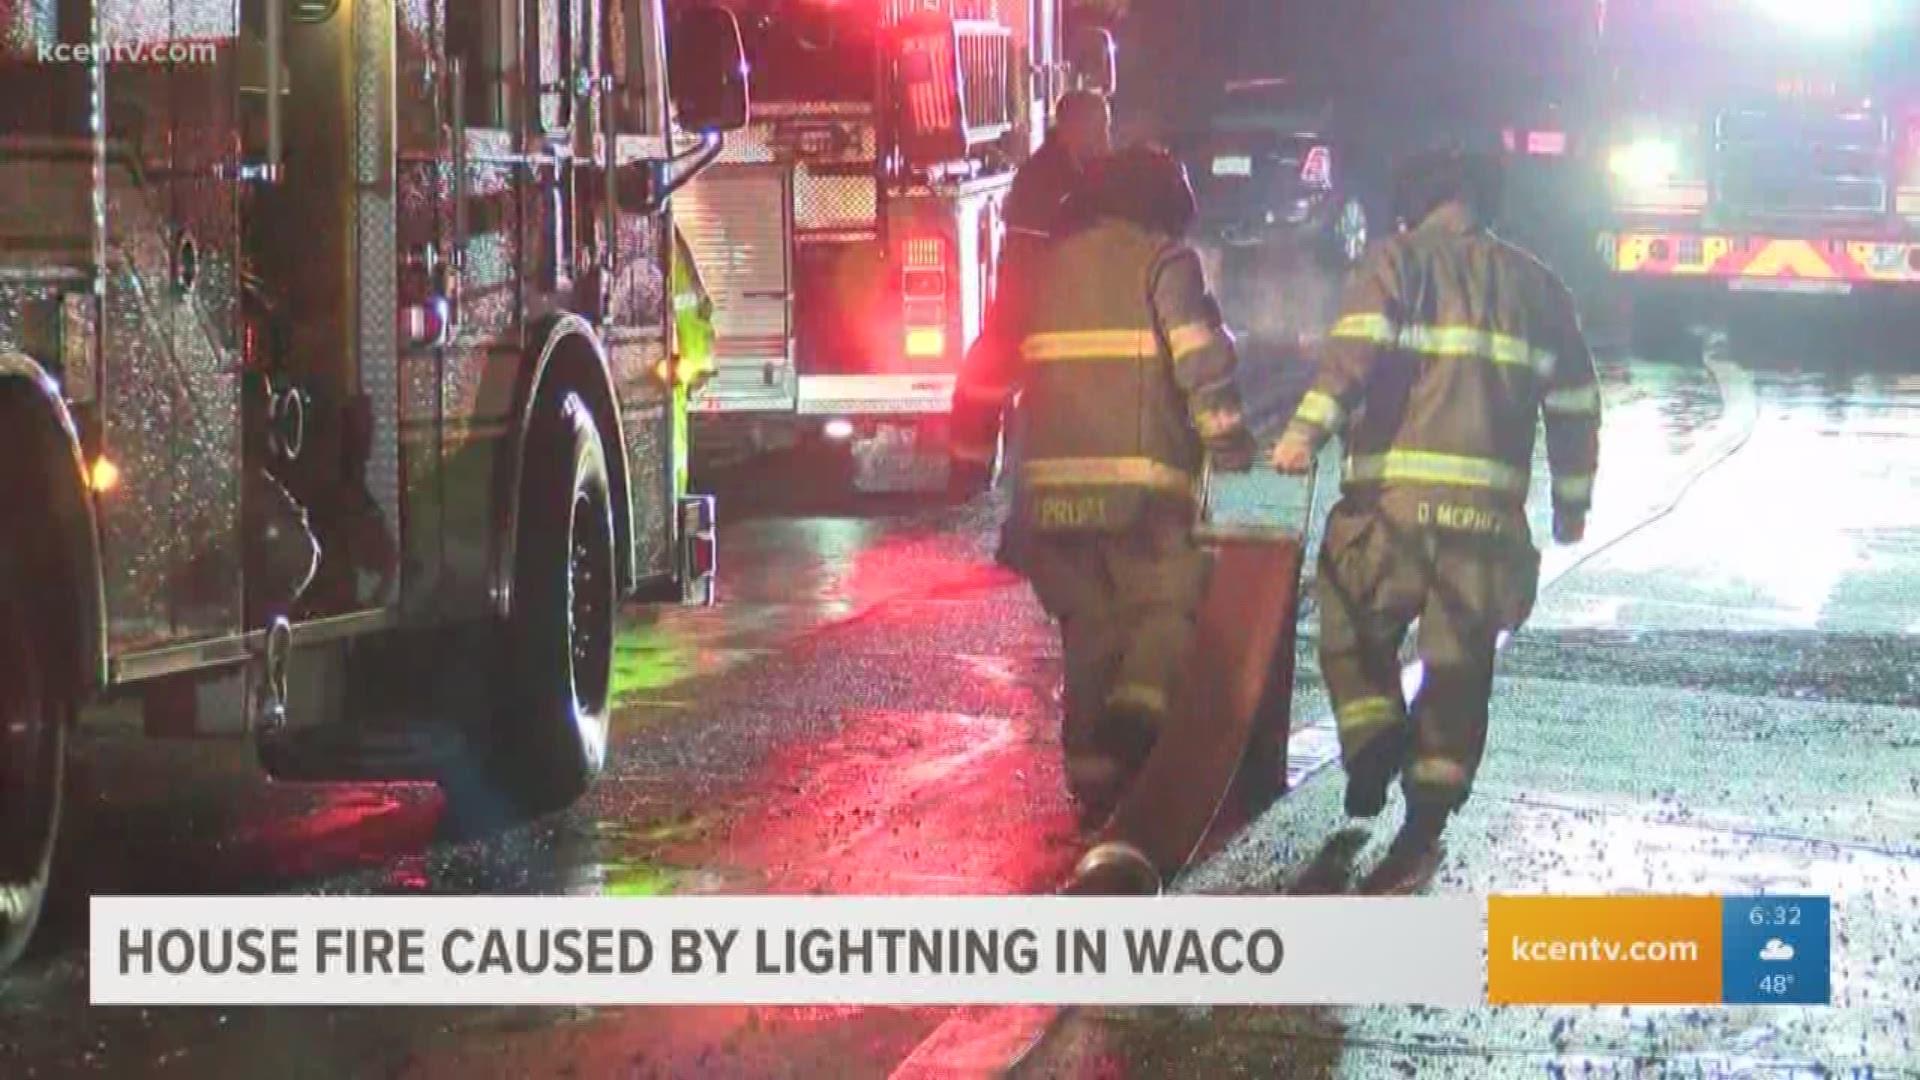 Thousands of power outages and two fires in Waco may have been caused by lightning